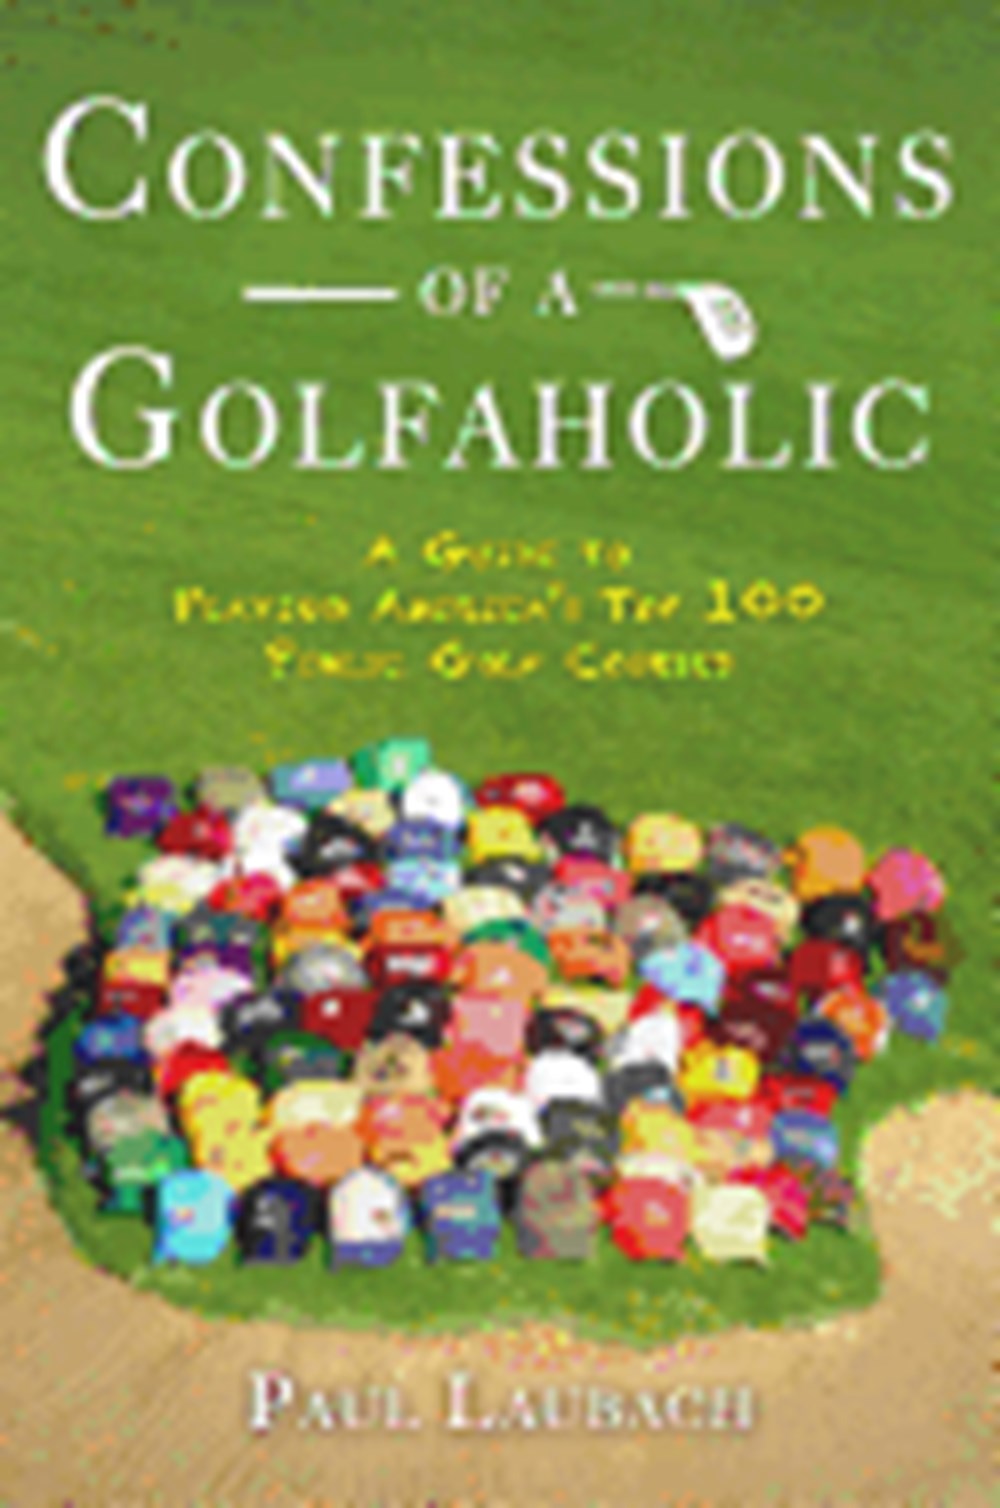 Confessions of a Golfaholic: A Guide to Playing America's Top 100 Public Golf Courses